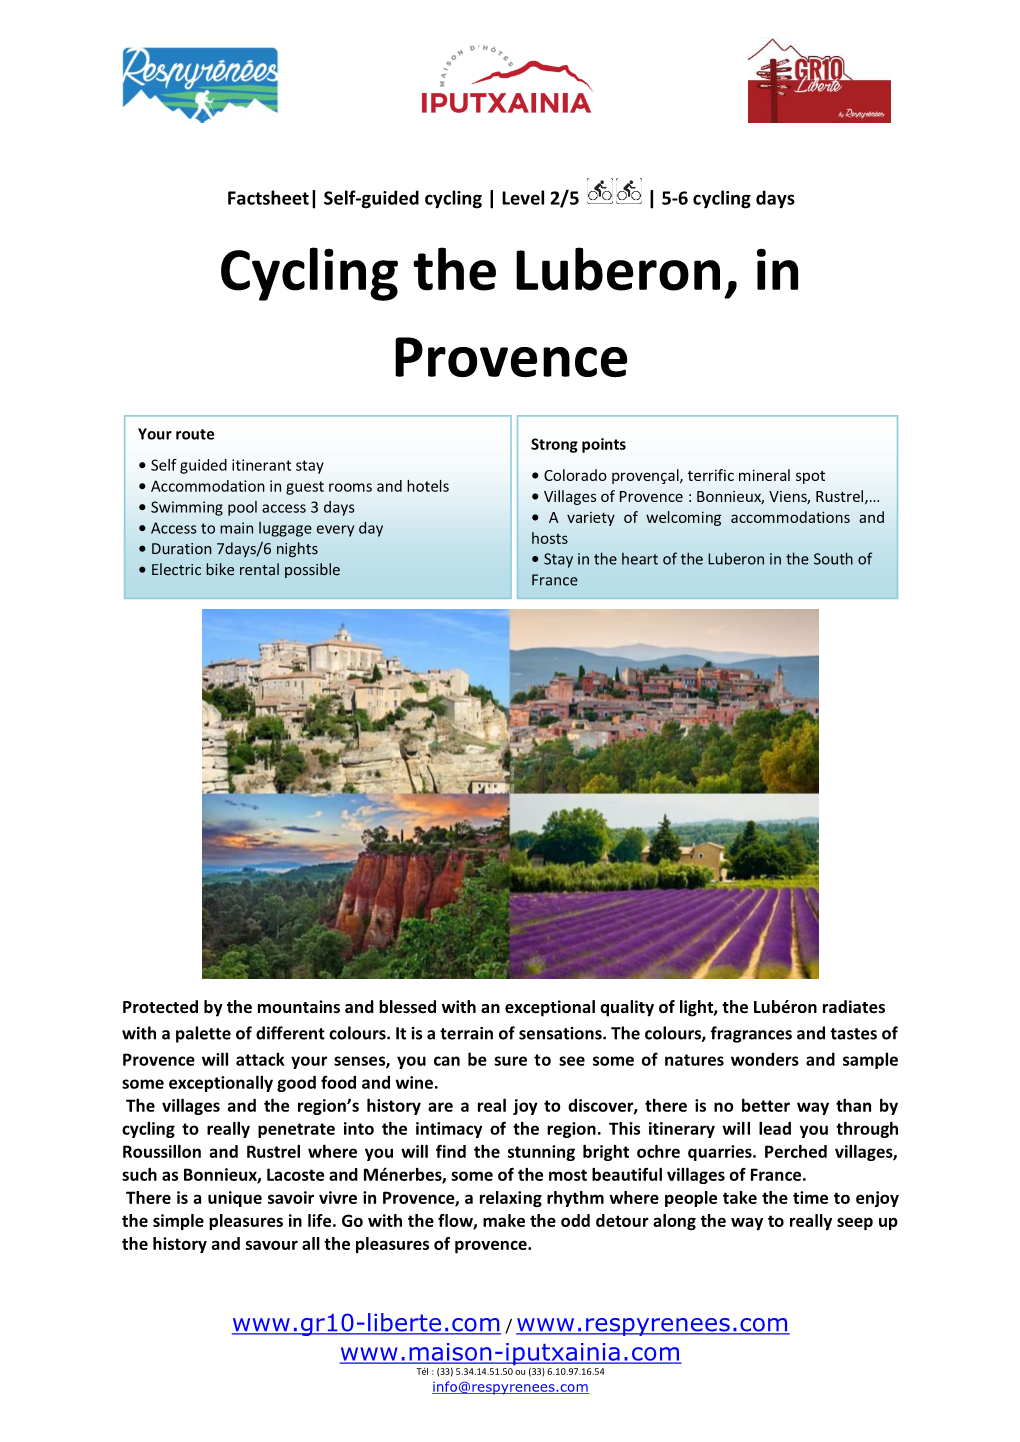 Cycling the Luberon, in Provence